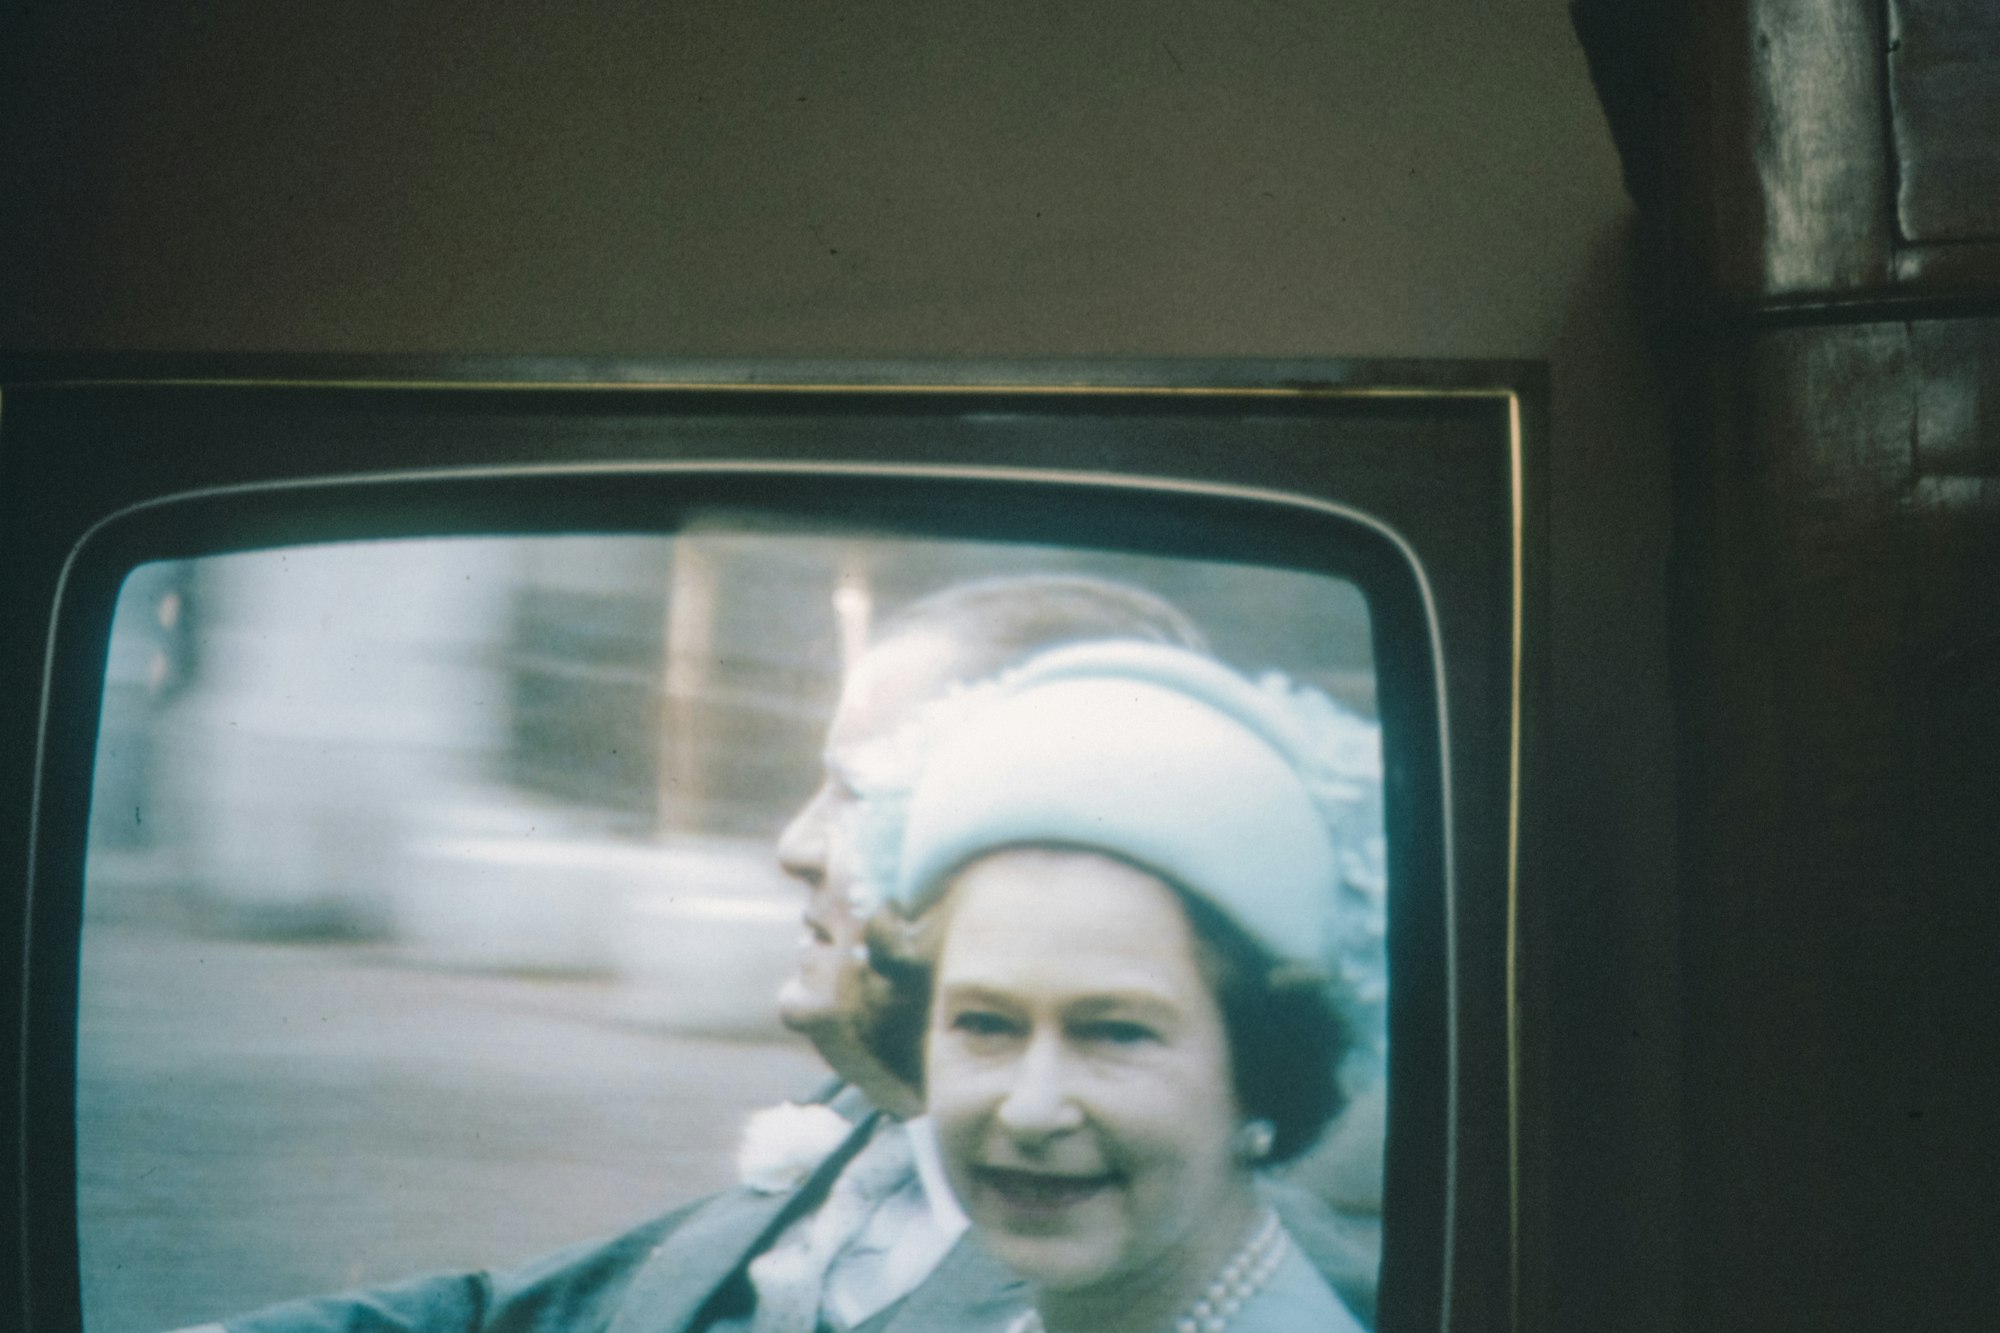 The Queen of England at the marriage of Prince Charles to Diana Spencer, a 1980s 35mm film slide photo - back when people took photos of their TV!